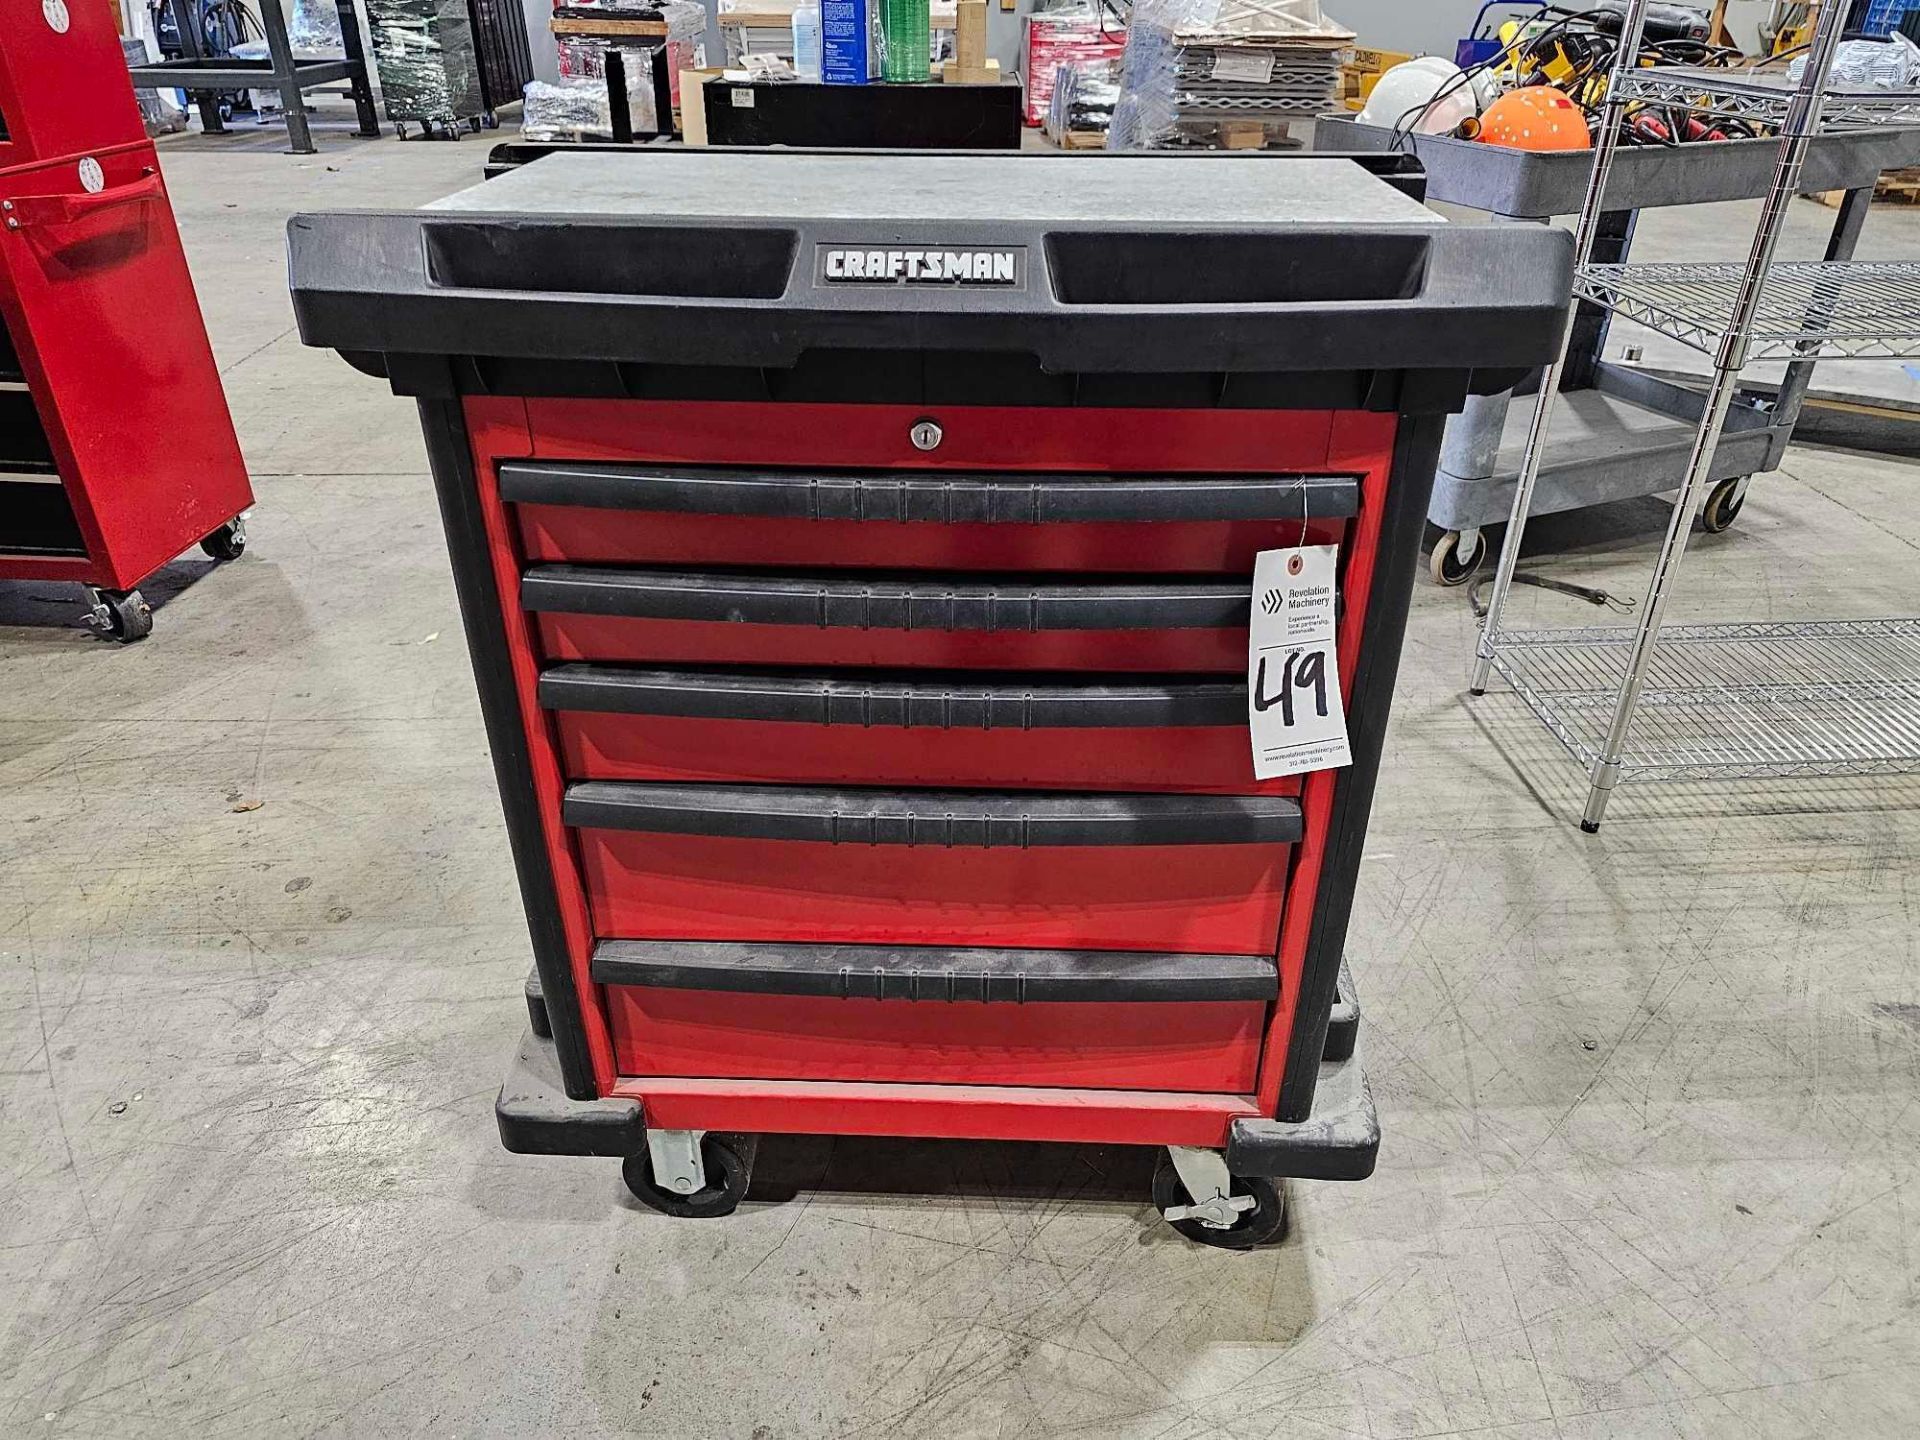 CRAFTSMAN TOOL CABINET WITH ELECTRICAL TOOLS